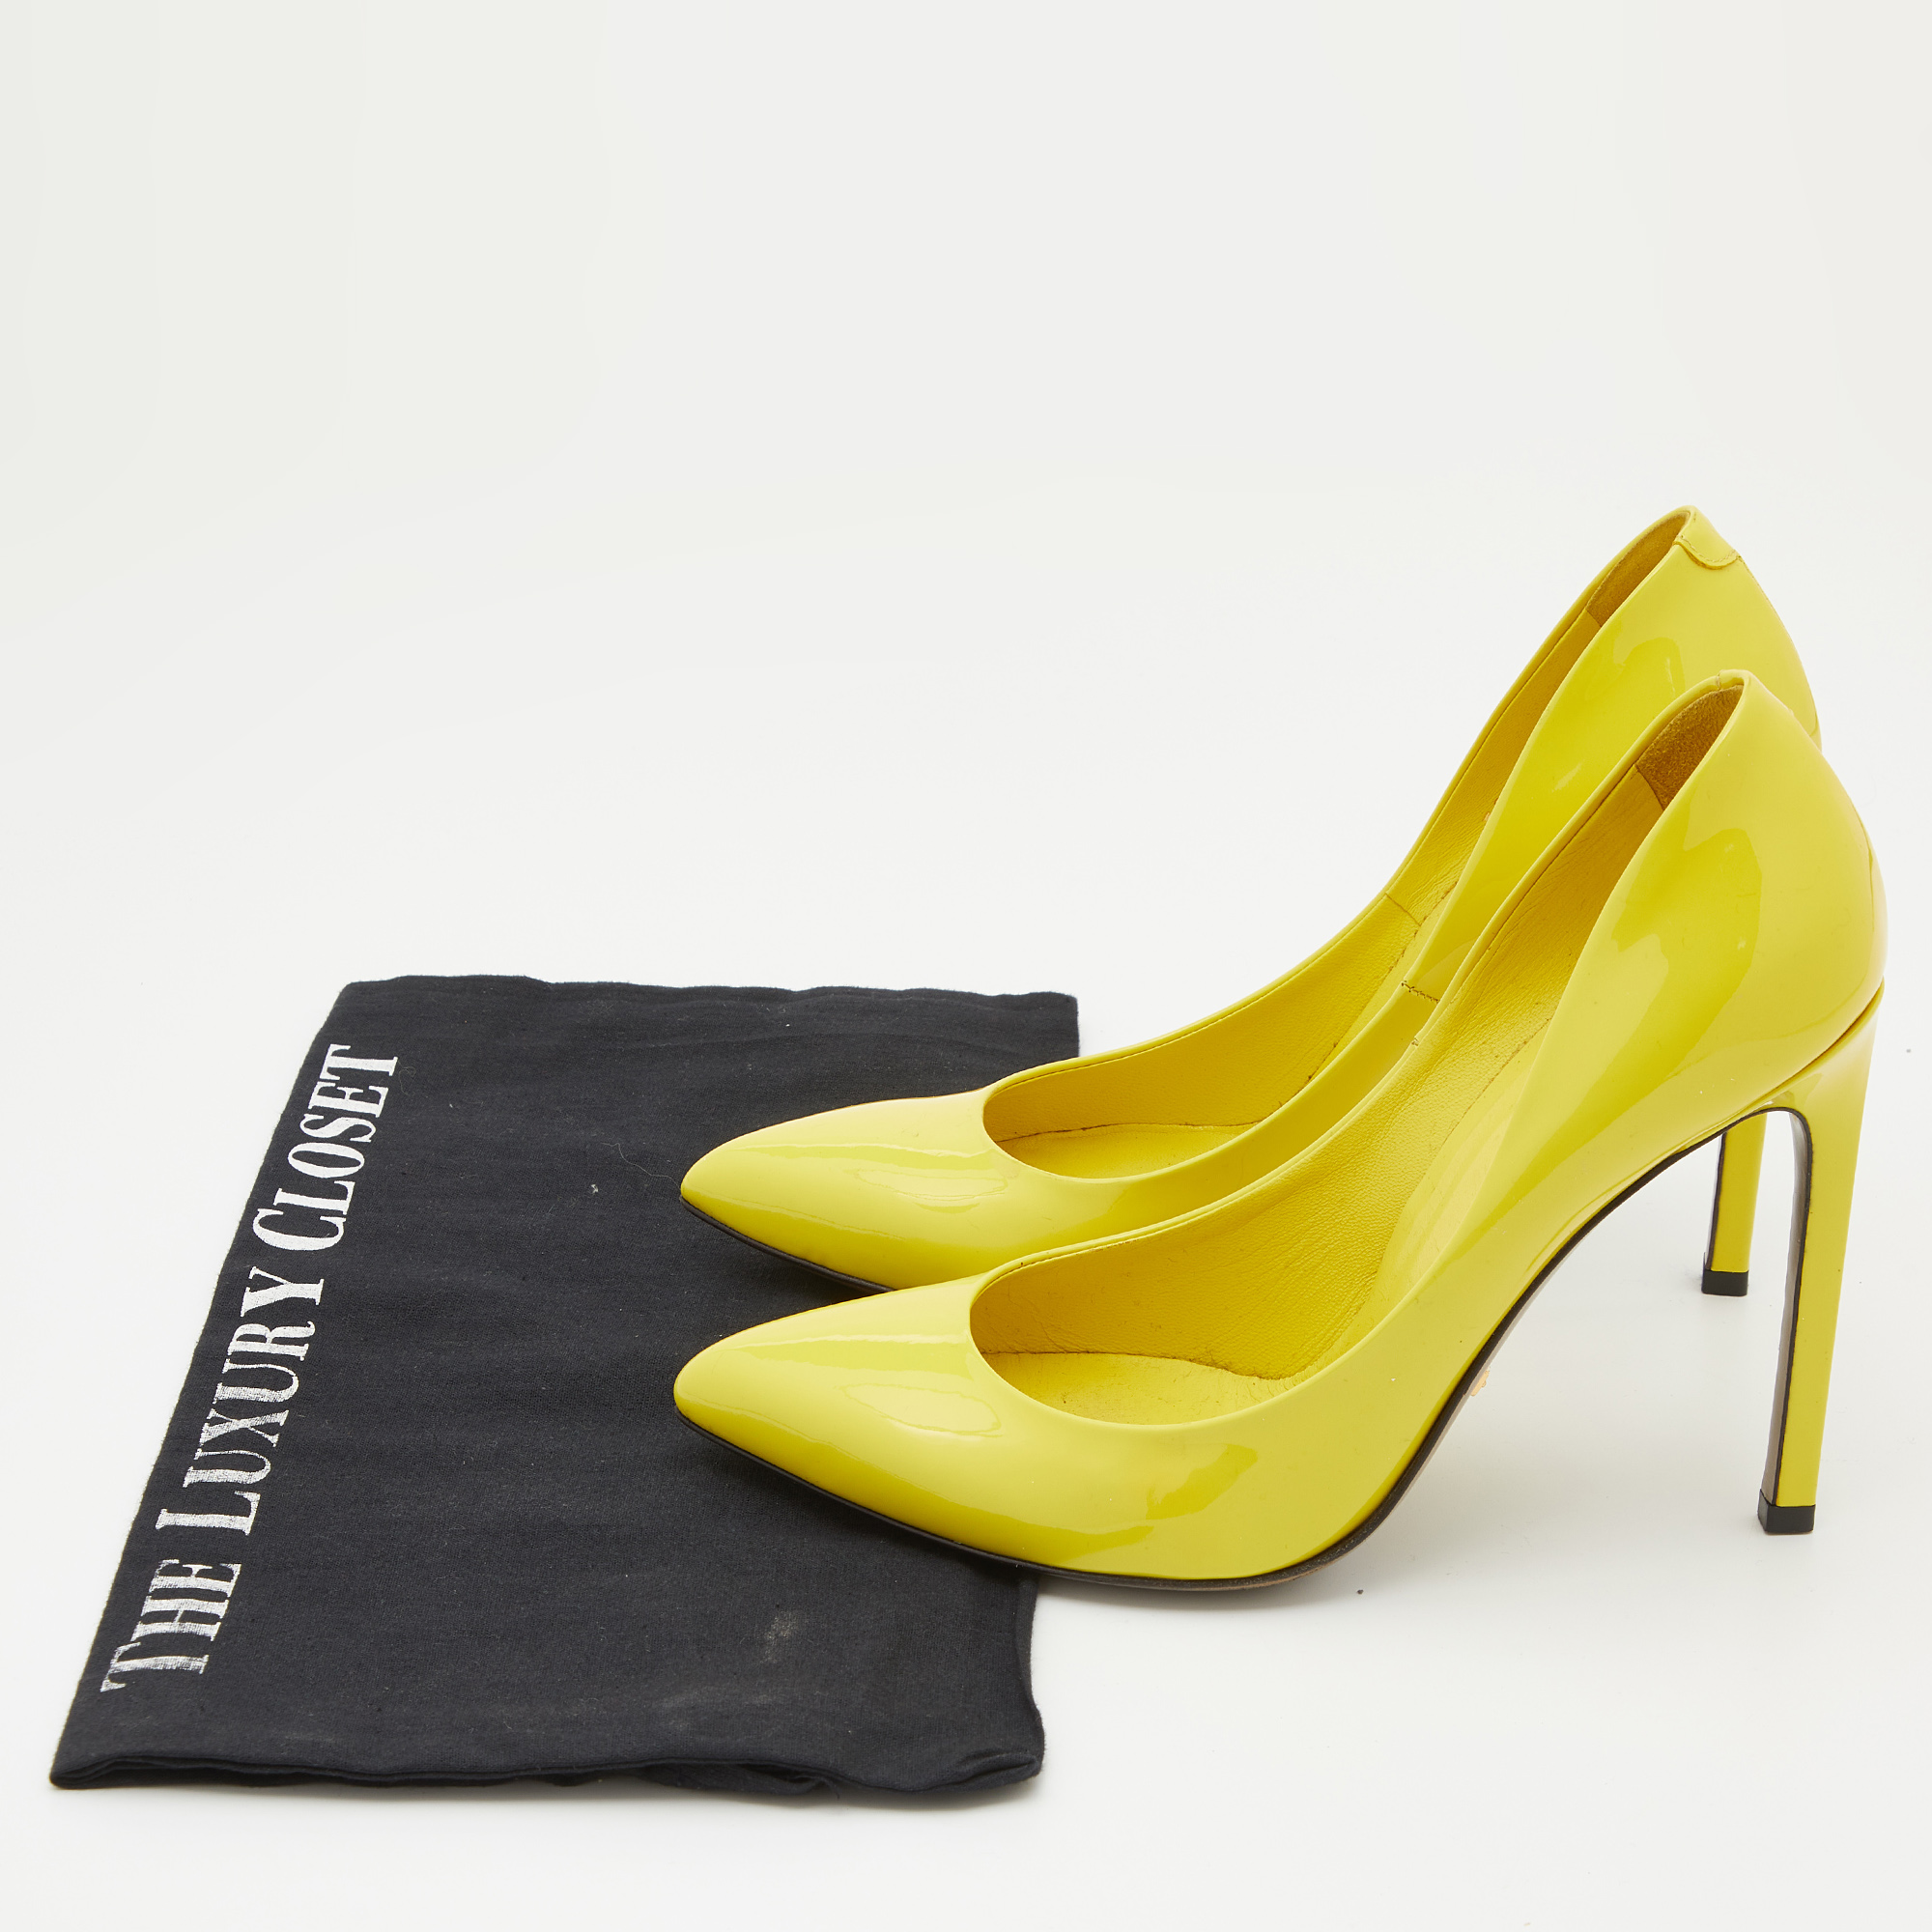 Gucci Bright Yellow Patent Leather Pointed Toe Pumps Size 37.5